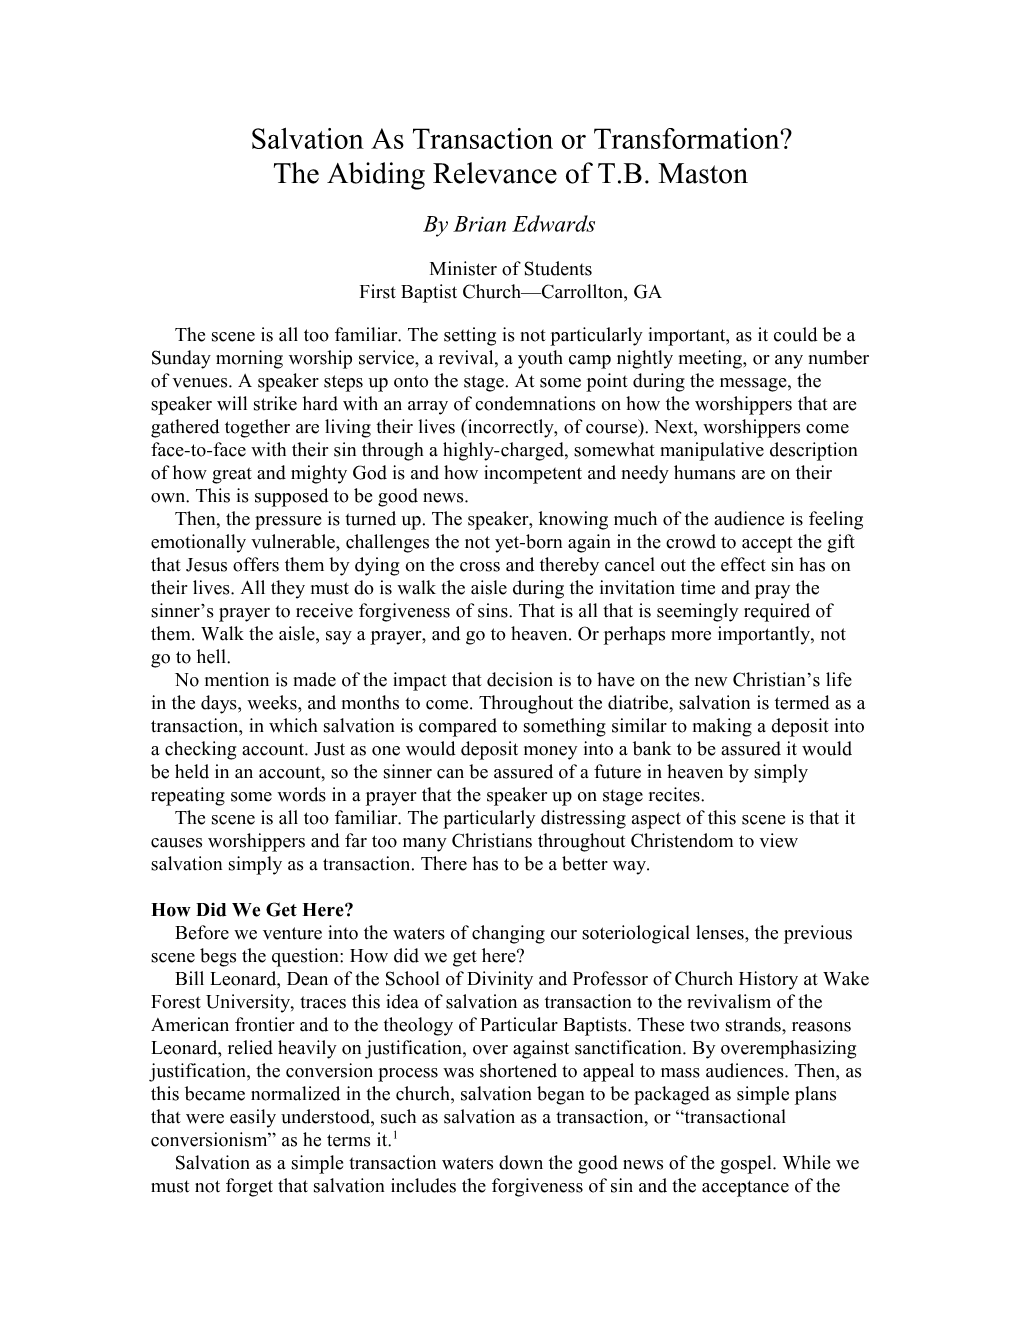 Salvation As Transaction Or Transformation? the Abiding Relevance of T.B. Maston